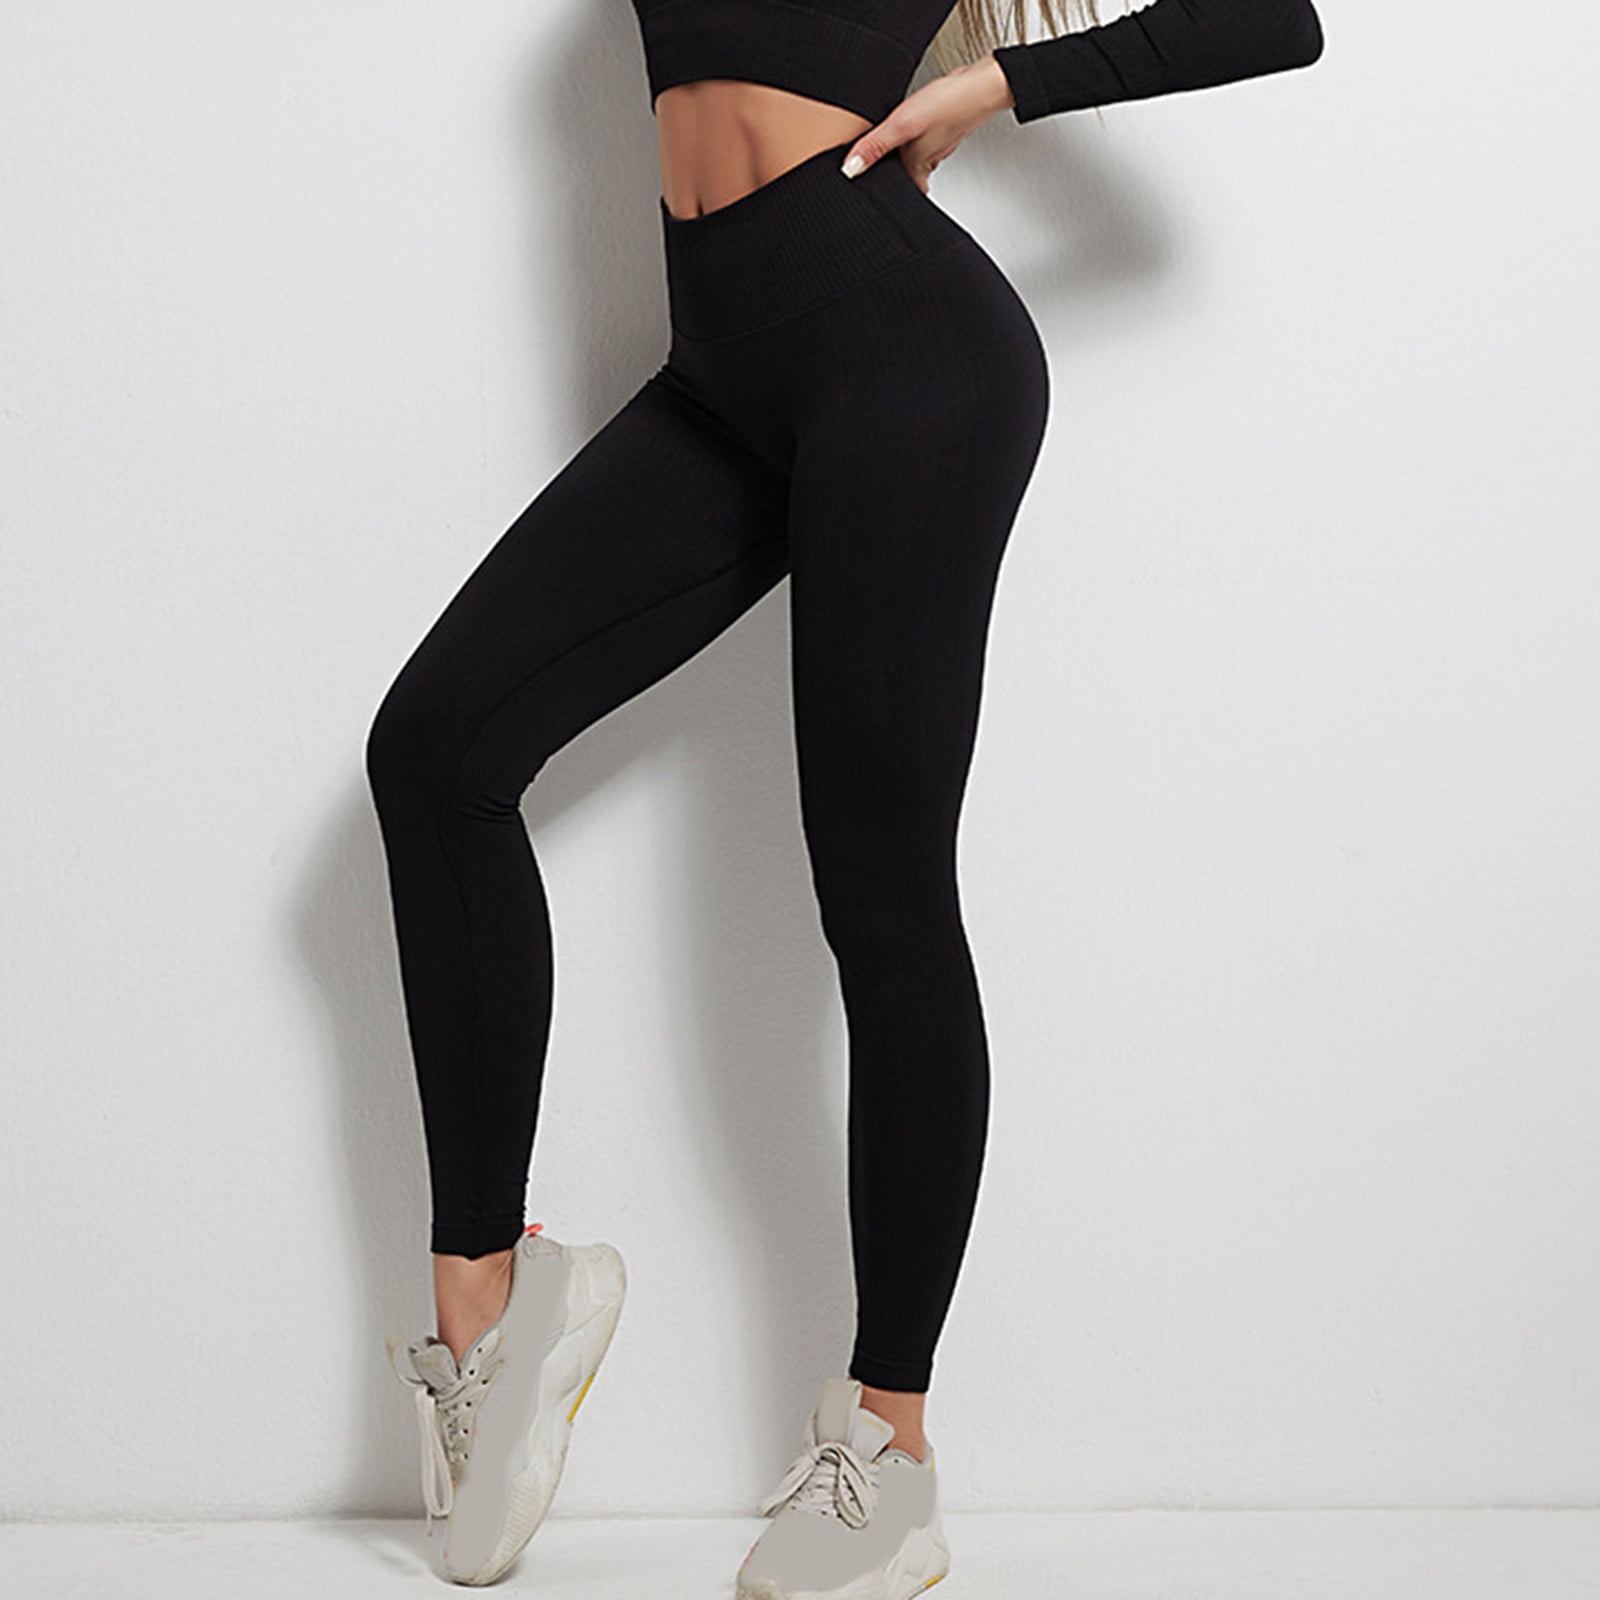 SMENG Athletic Yoga Pants with Pockets for Ladies Petite